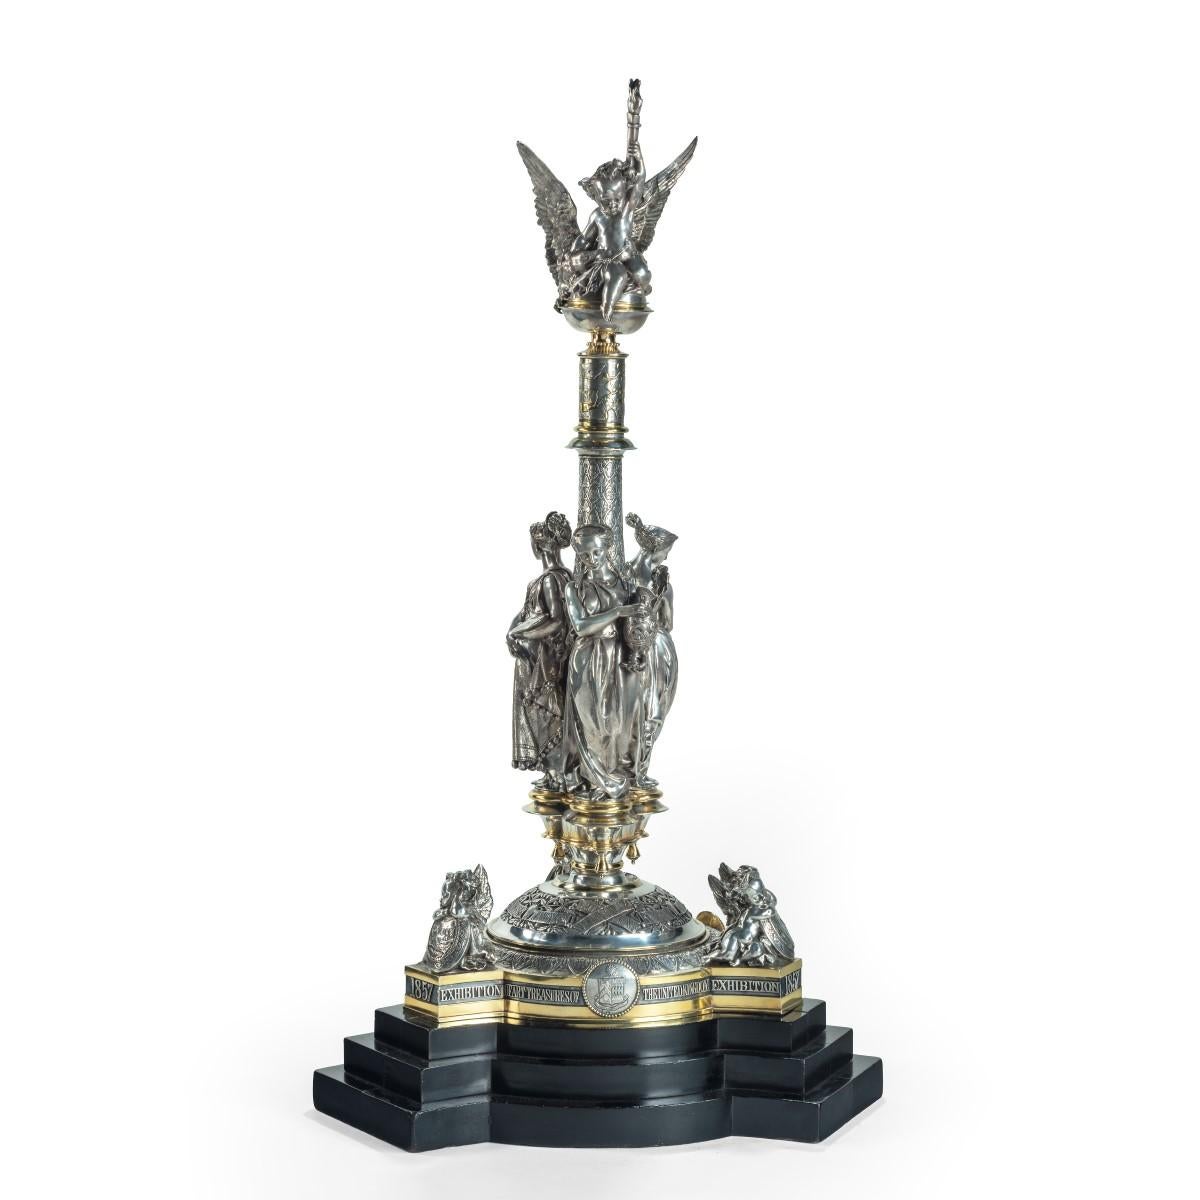 J. B. Waring describes this oxidised silver Testimonial as follows: “The Manchester Art-Treasures Testimonial is surmounted by a figure of genius contending with an eagle, around which are allegorical figures of Painting, Sculpture and Industrial